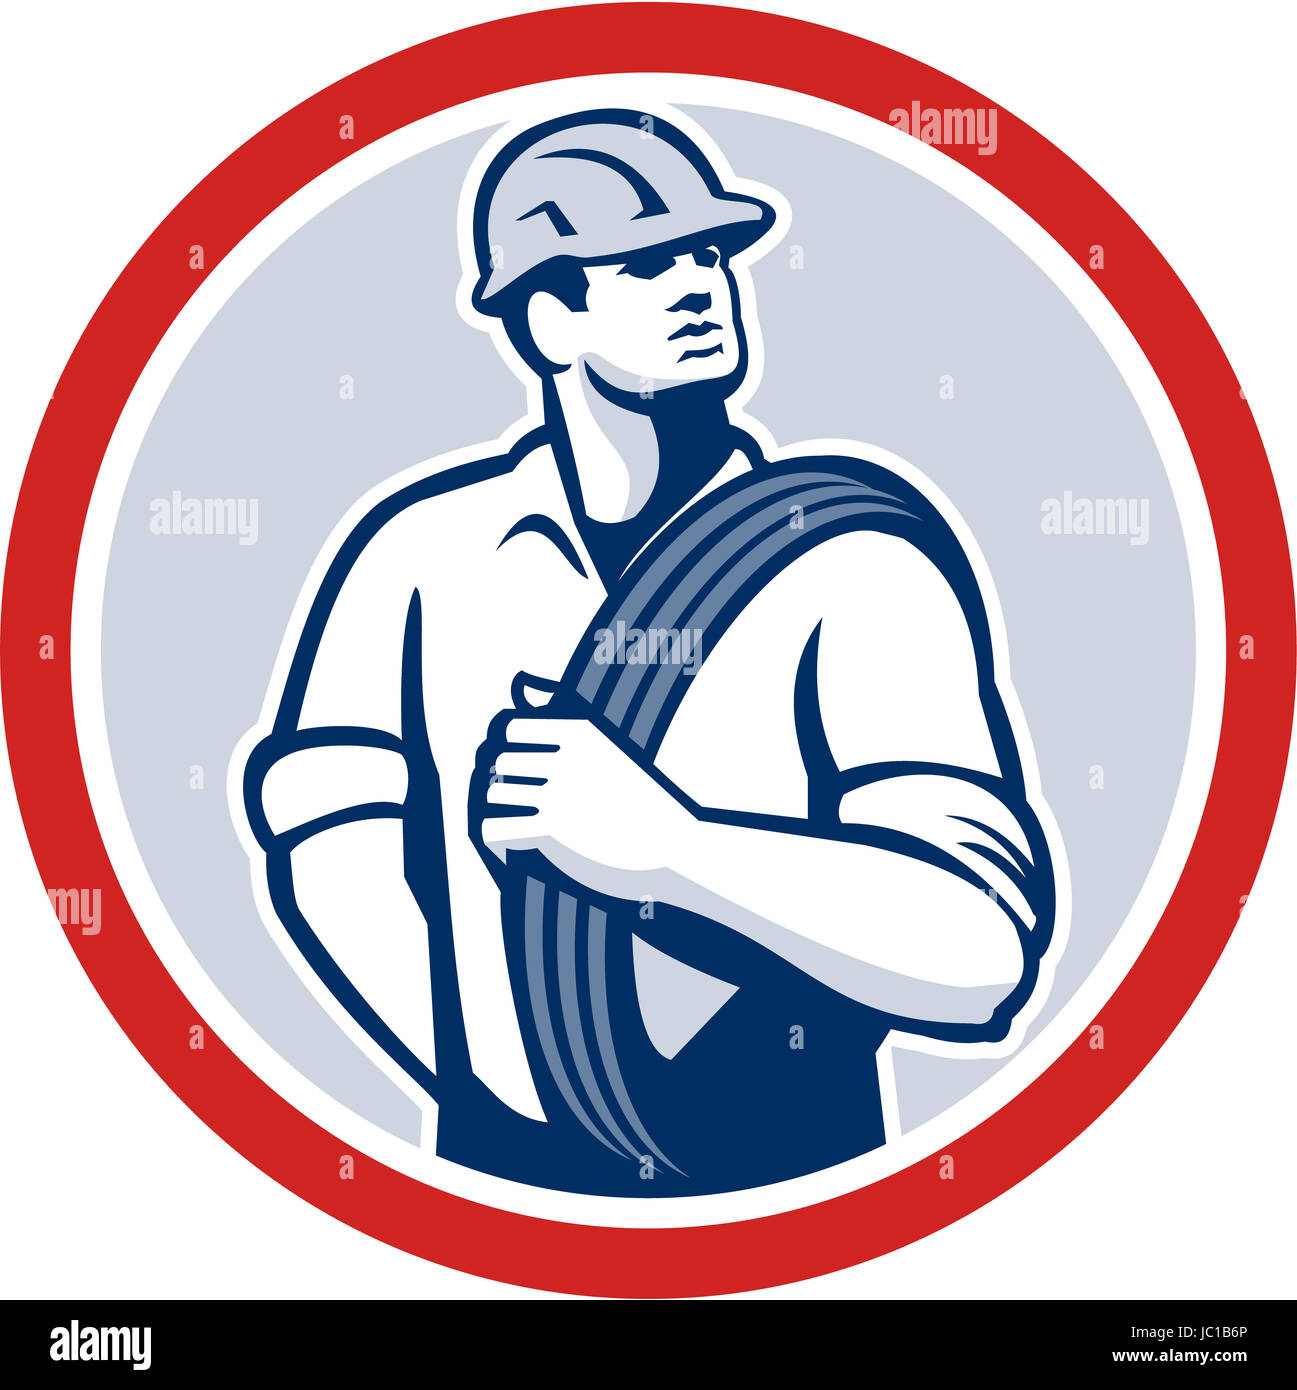 Illustration of a power lineman telephone repairman worker holding wire cable over shoulder done in retro style set inside circle. Stock Photo